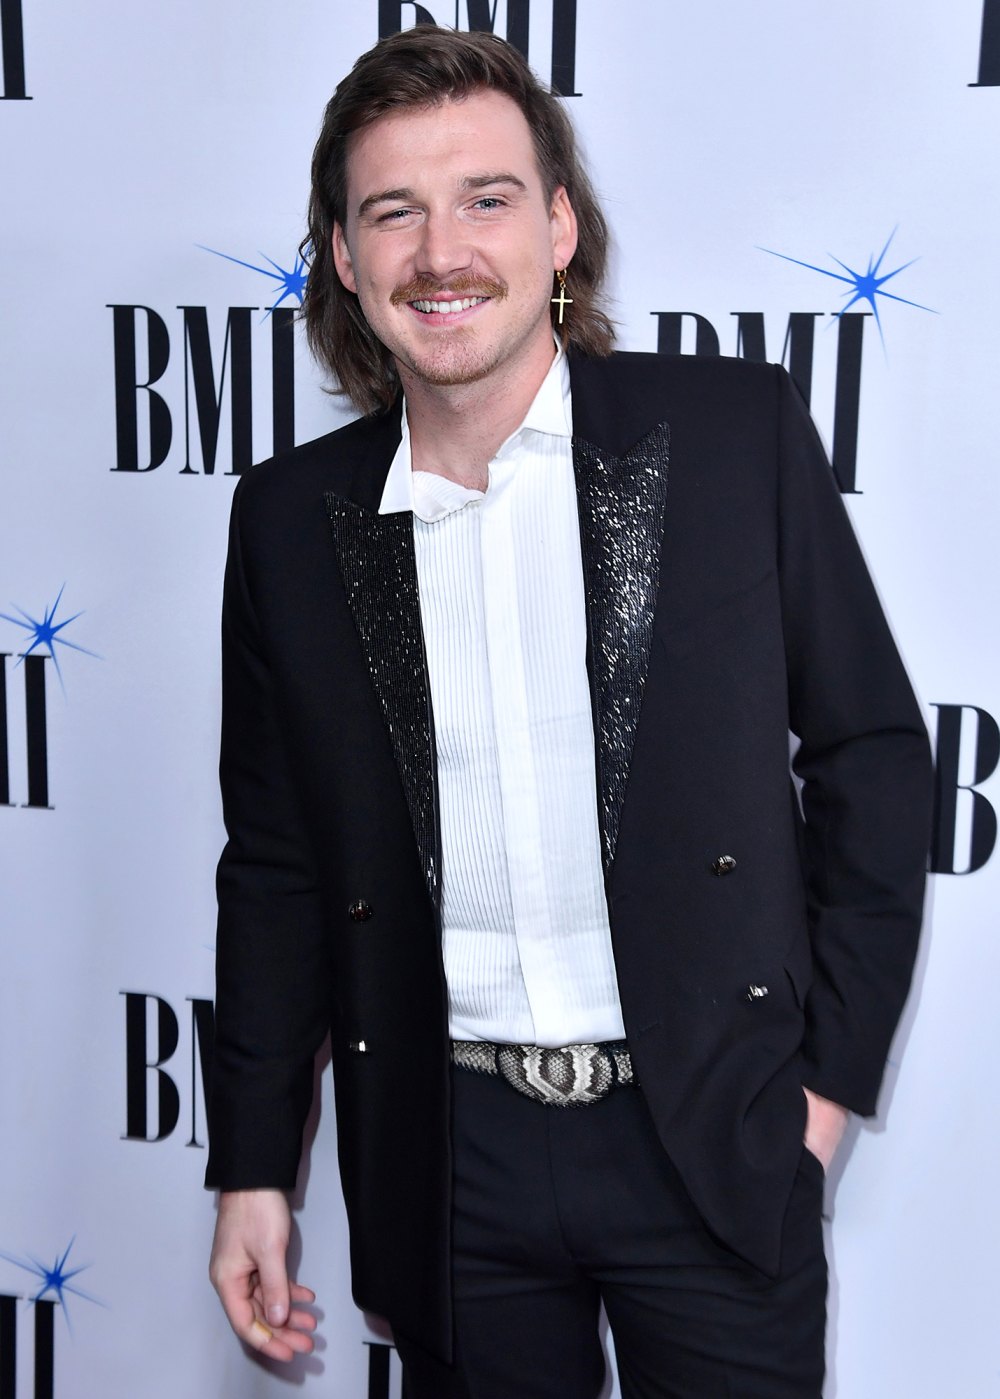 Morgan Wallen Doesn't Plan to Keep 'Clean-Shaven' Look 'Forever' After Cutting Mullet, Mustache